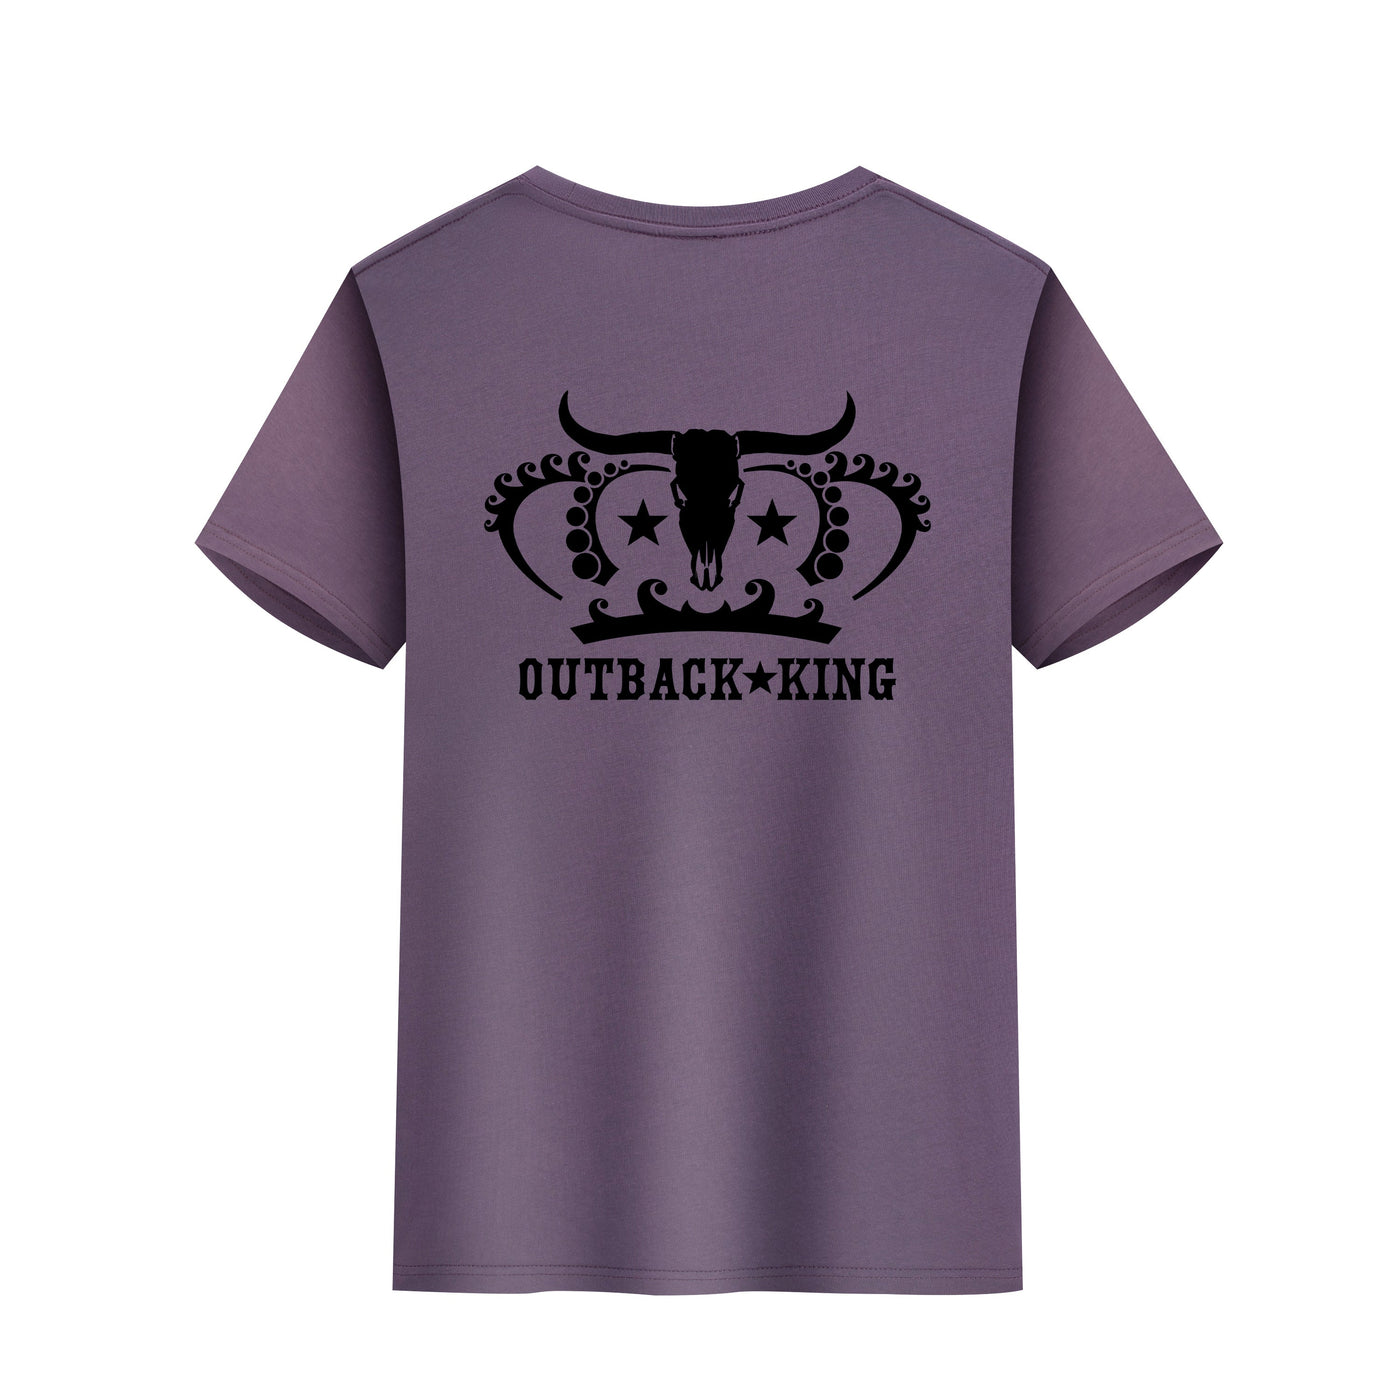 Outback King | T-shirt Nile green